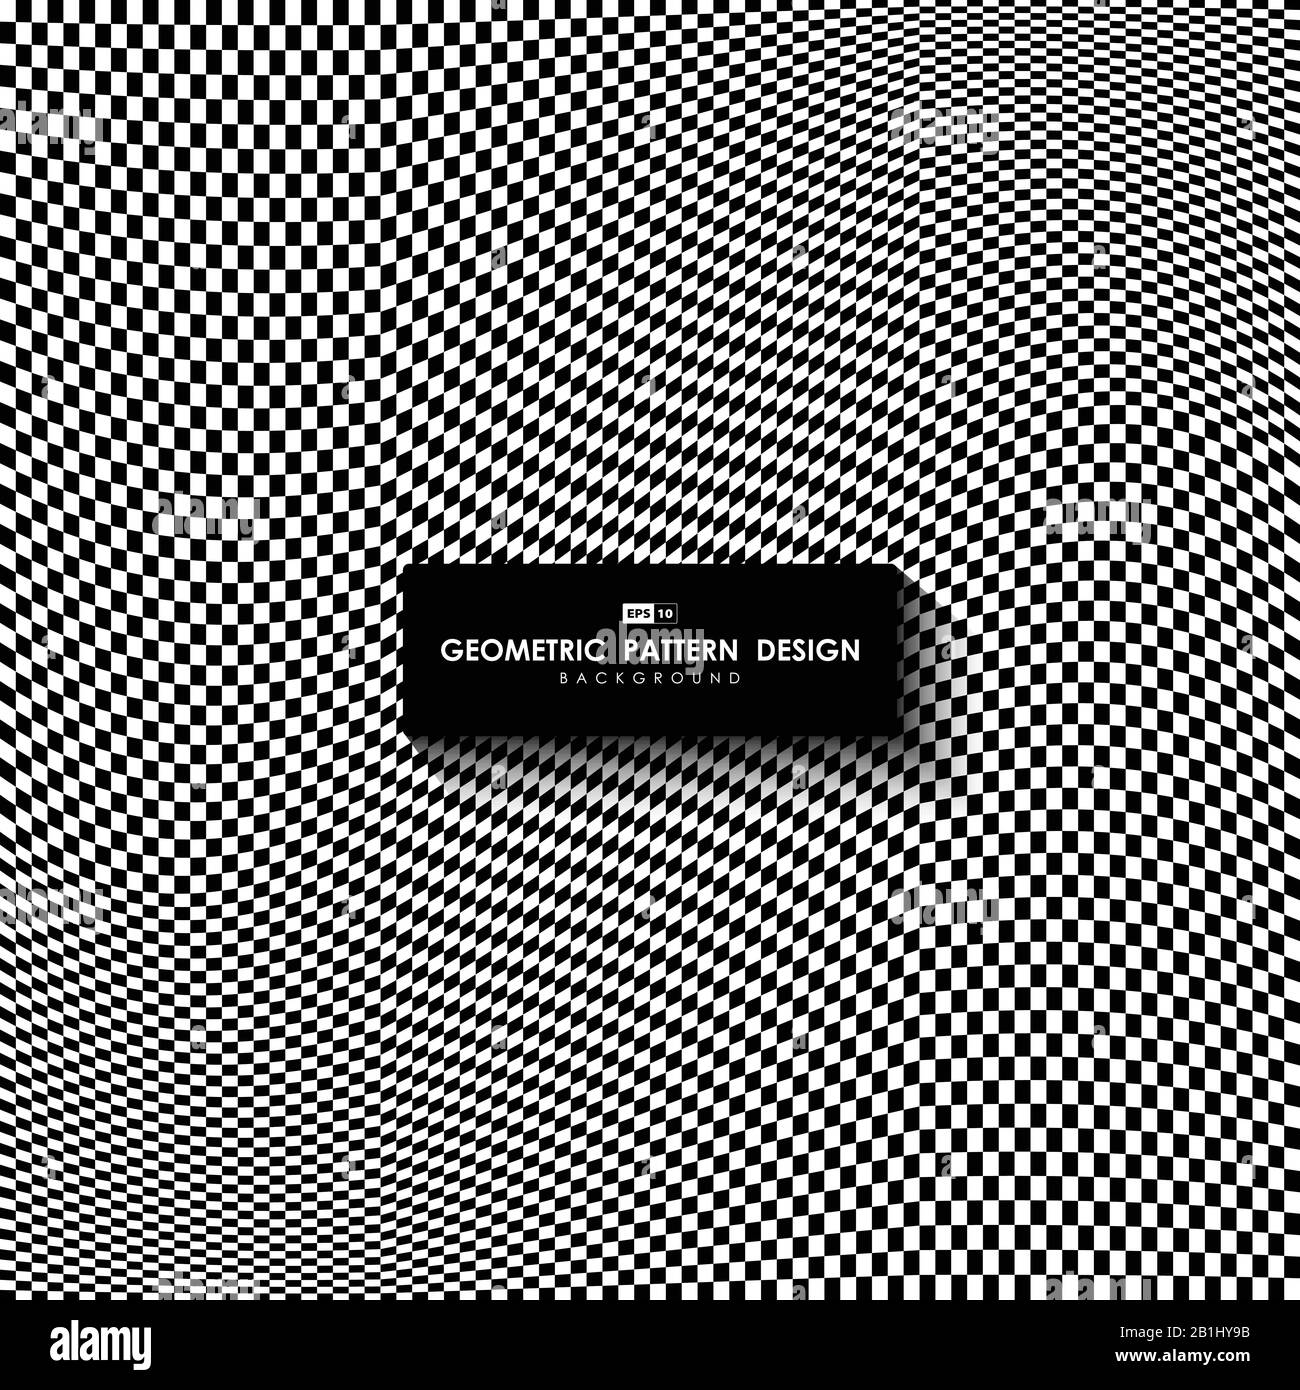 Abstract white and black square pattern mesh design artwork background. Use for ad, poster, artwork, template design. illustration vector eps10 Stock Vector